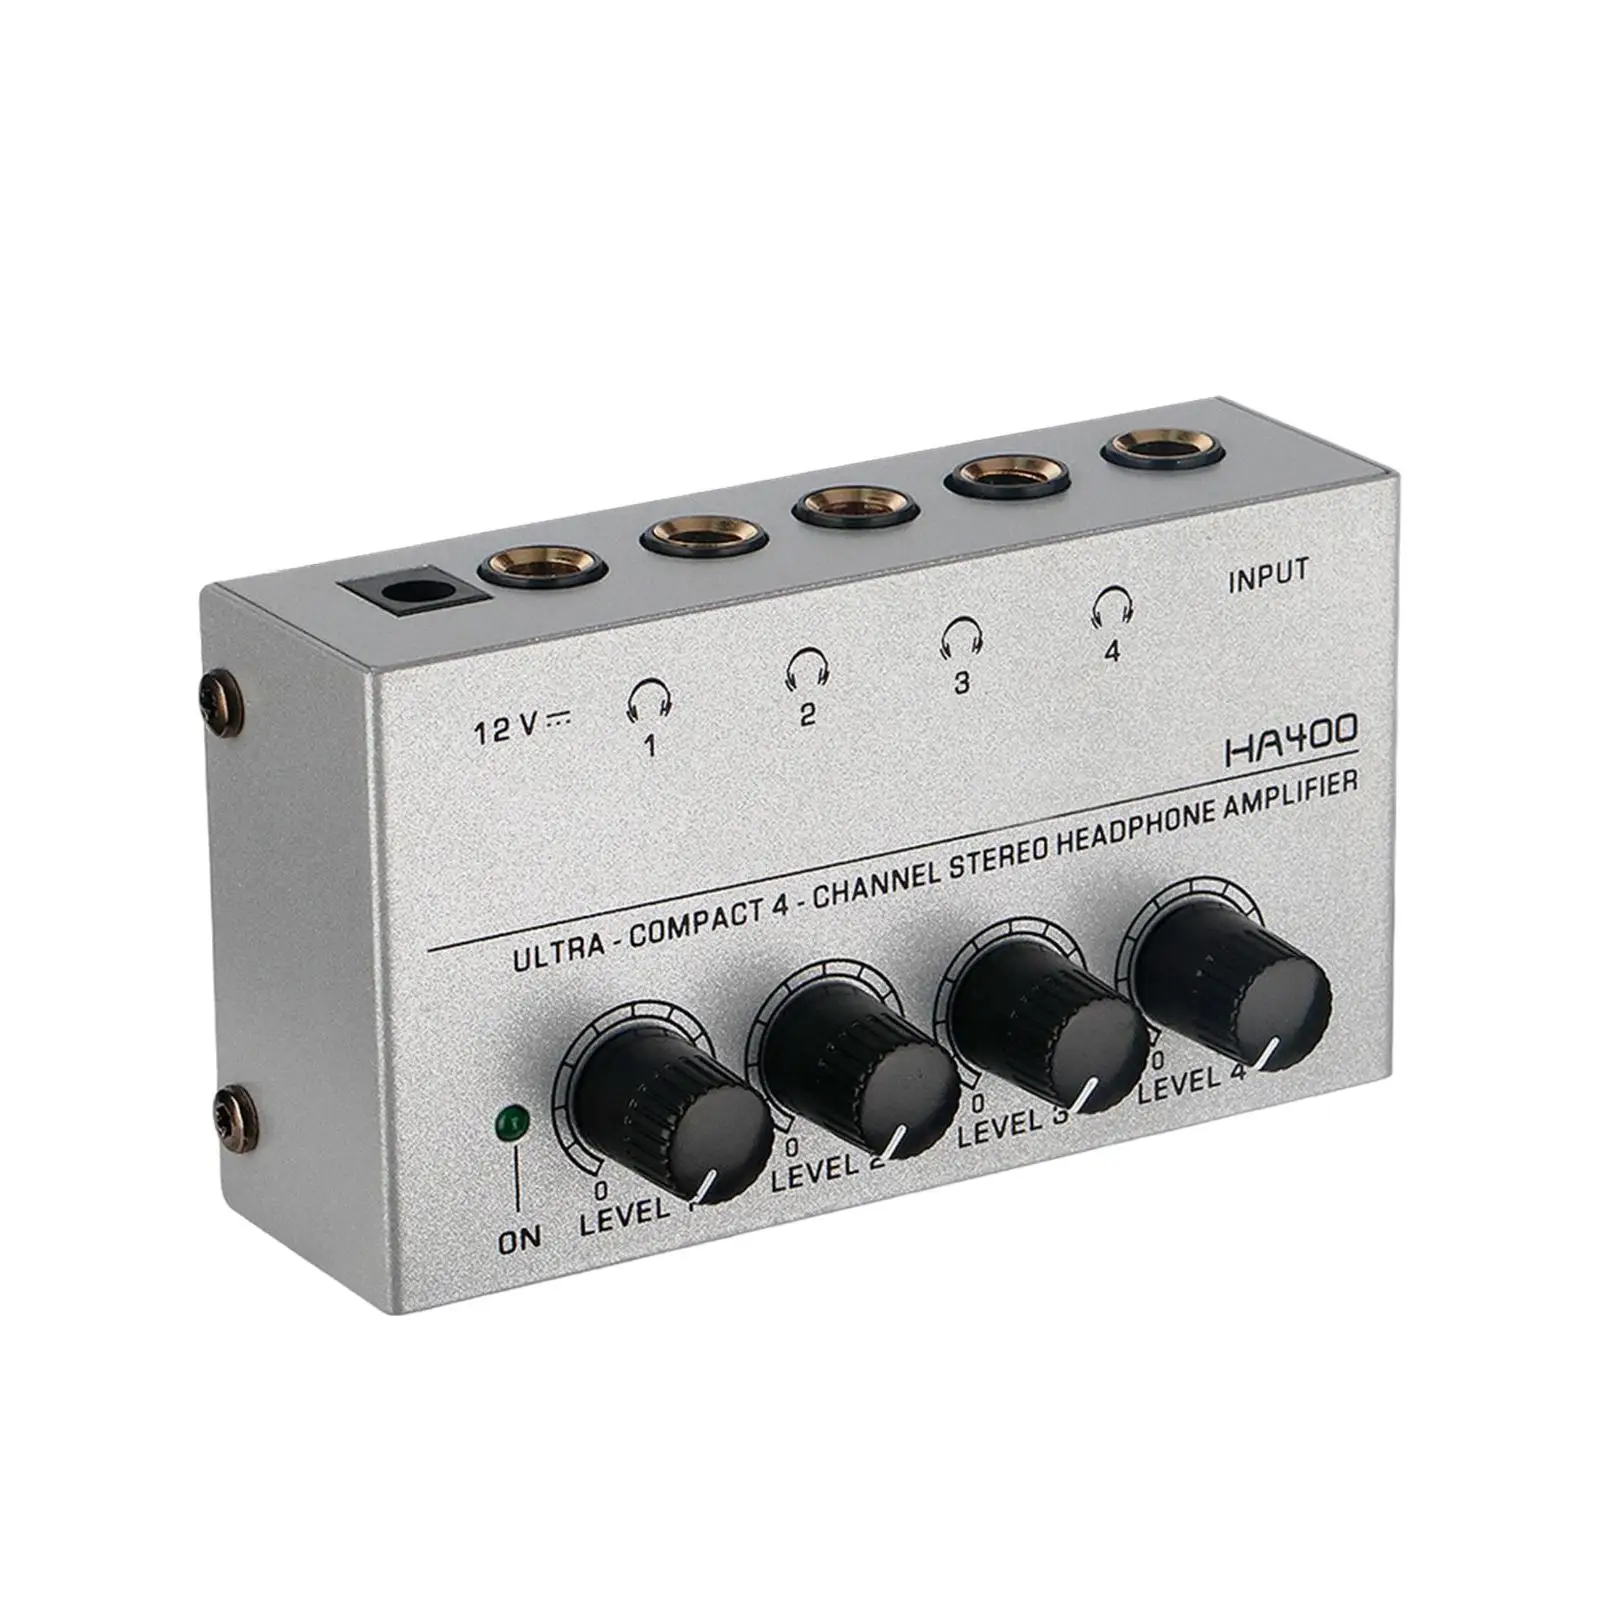 4 Channel Headphone Amp Loudspeaker Portable for Stage Performances Home Recording